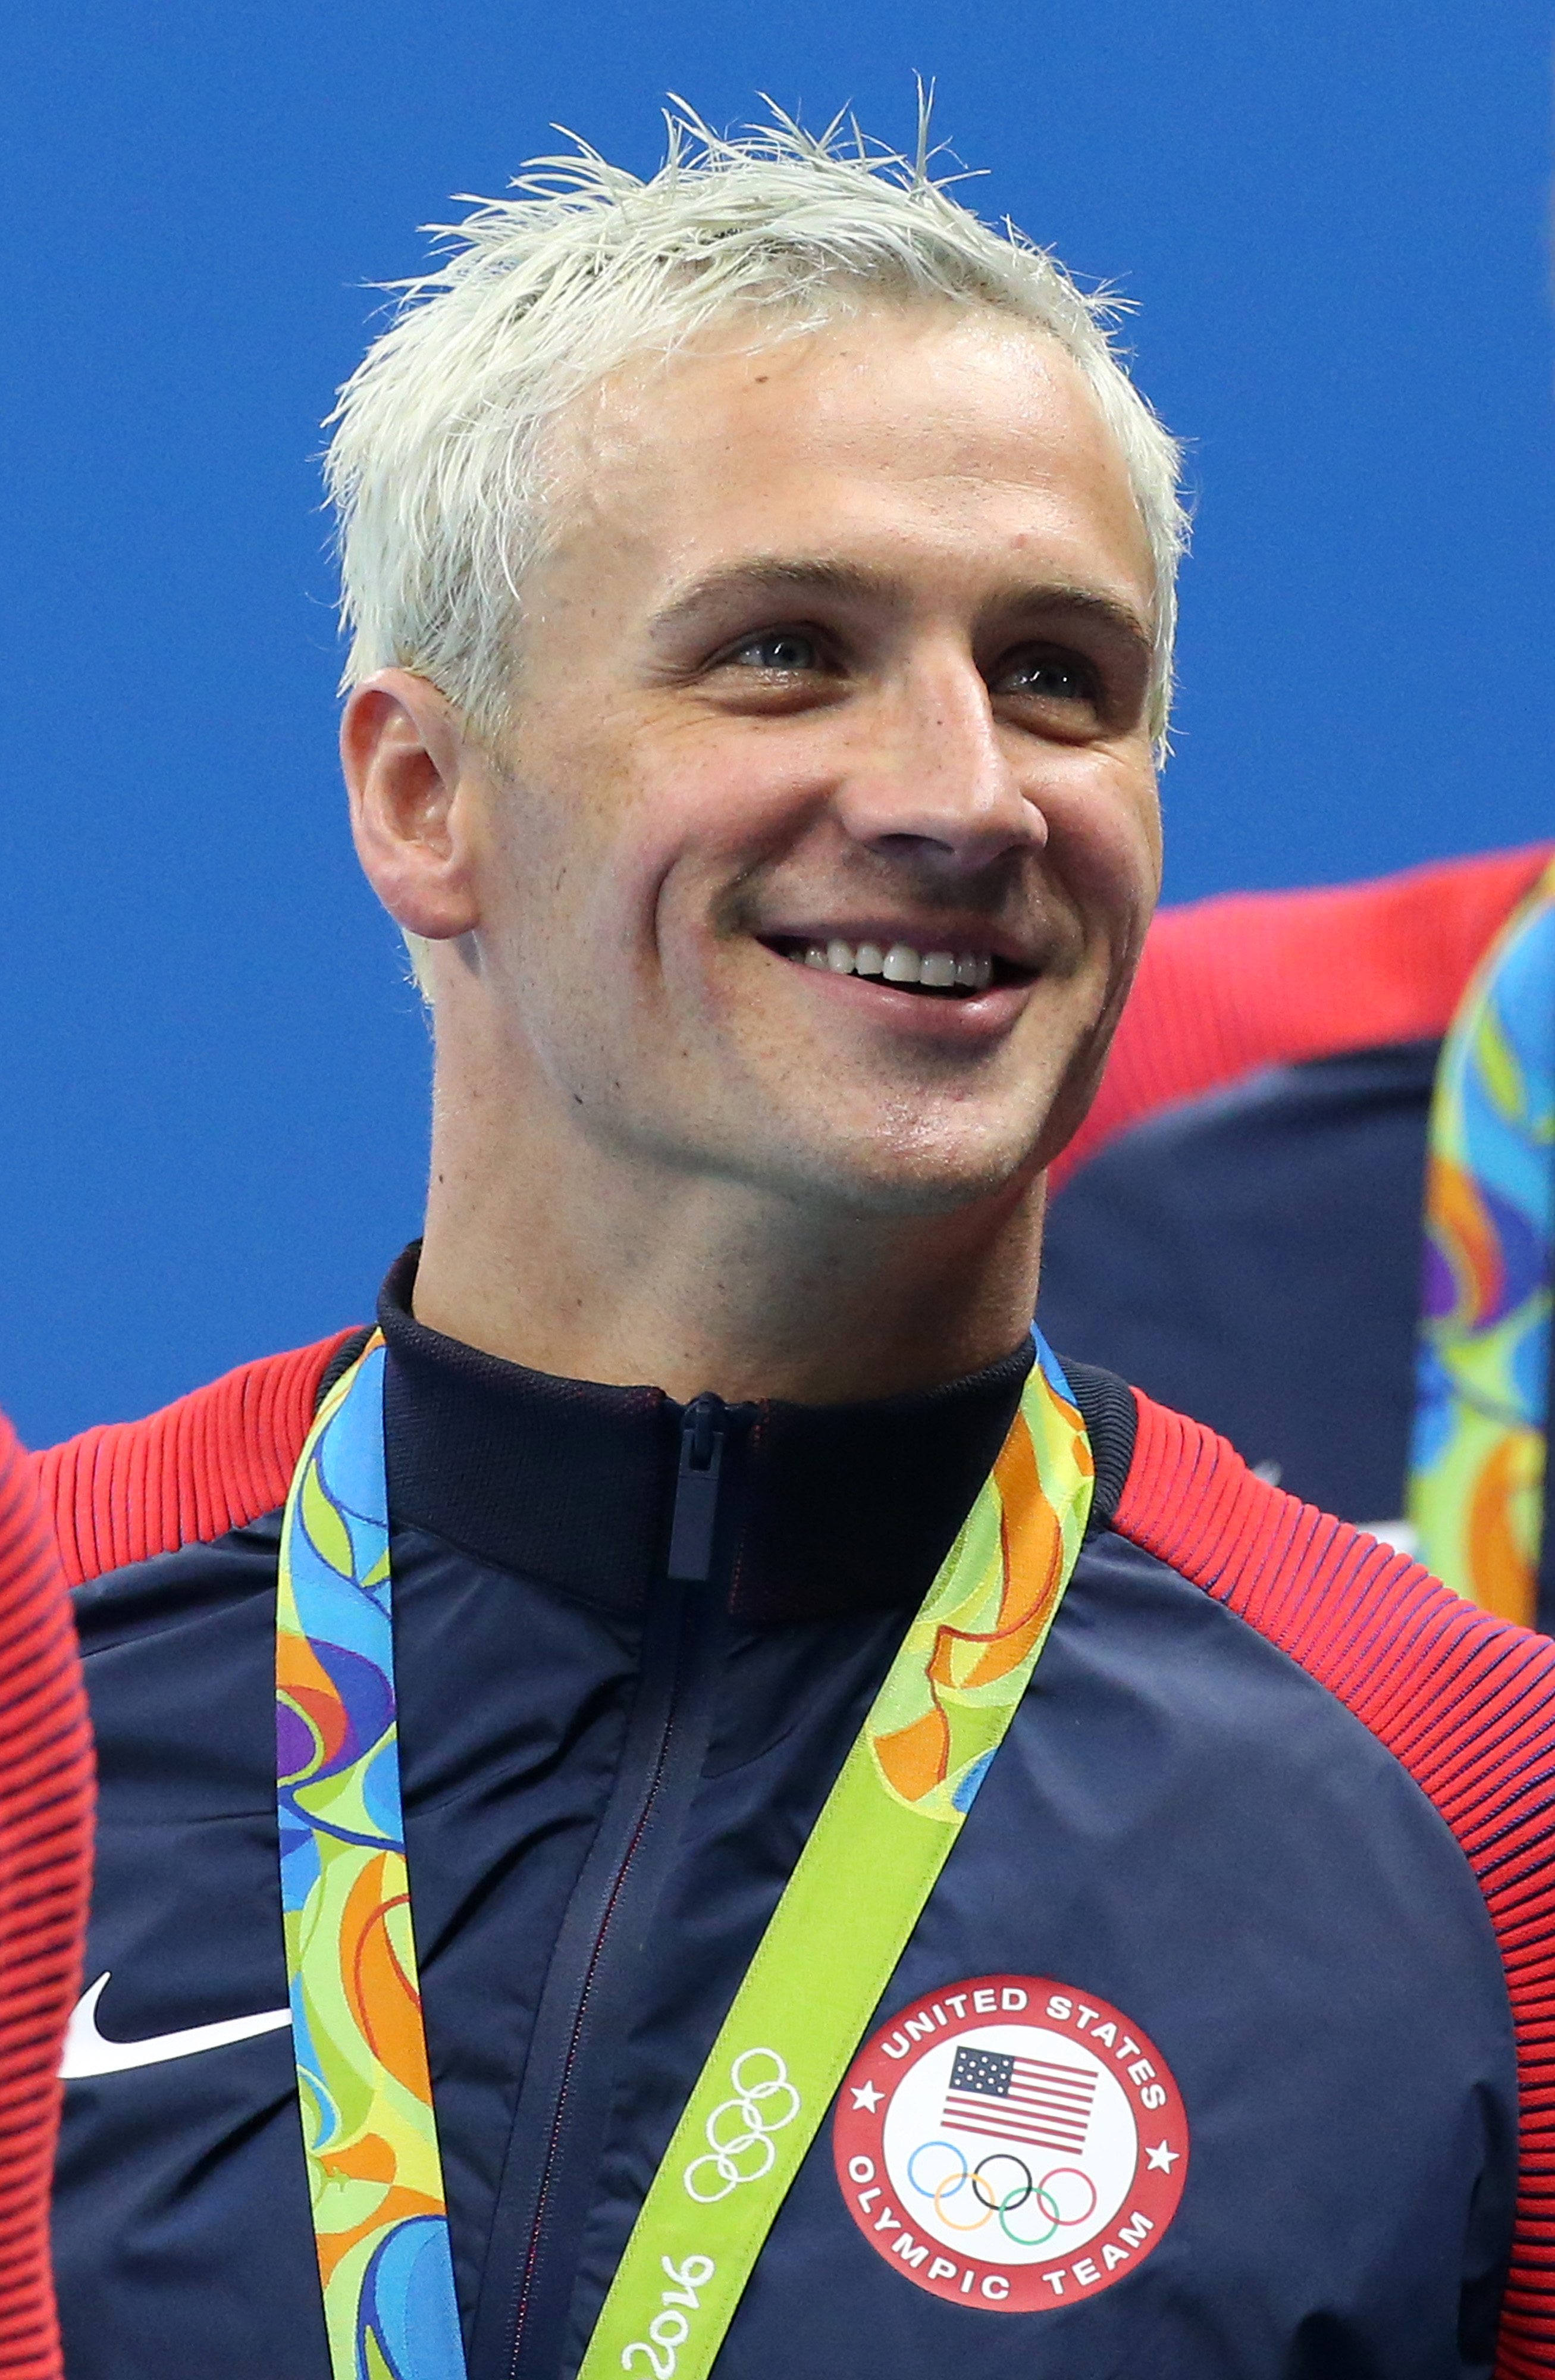 RIO DE JANEIRO, BRAZIL - AUGUST 9: Ryan Lochte of Team USA celebrates winning the gold medal during the medal ceremony of the men's 200m freestyle relay on day 4 of the Rio 2016 Olympic Games at Olympic Aquatics Stadium on August 9, 2016 in Rio de Janeiro, Brazil. (Photo by Jean Catuffe/Getty Images)